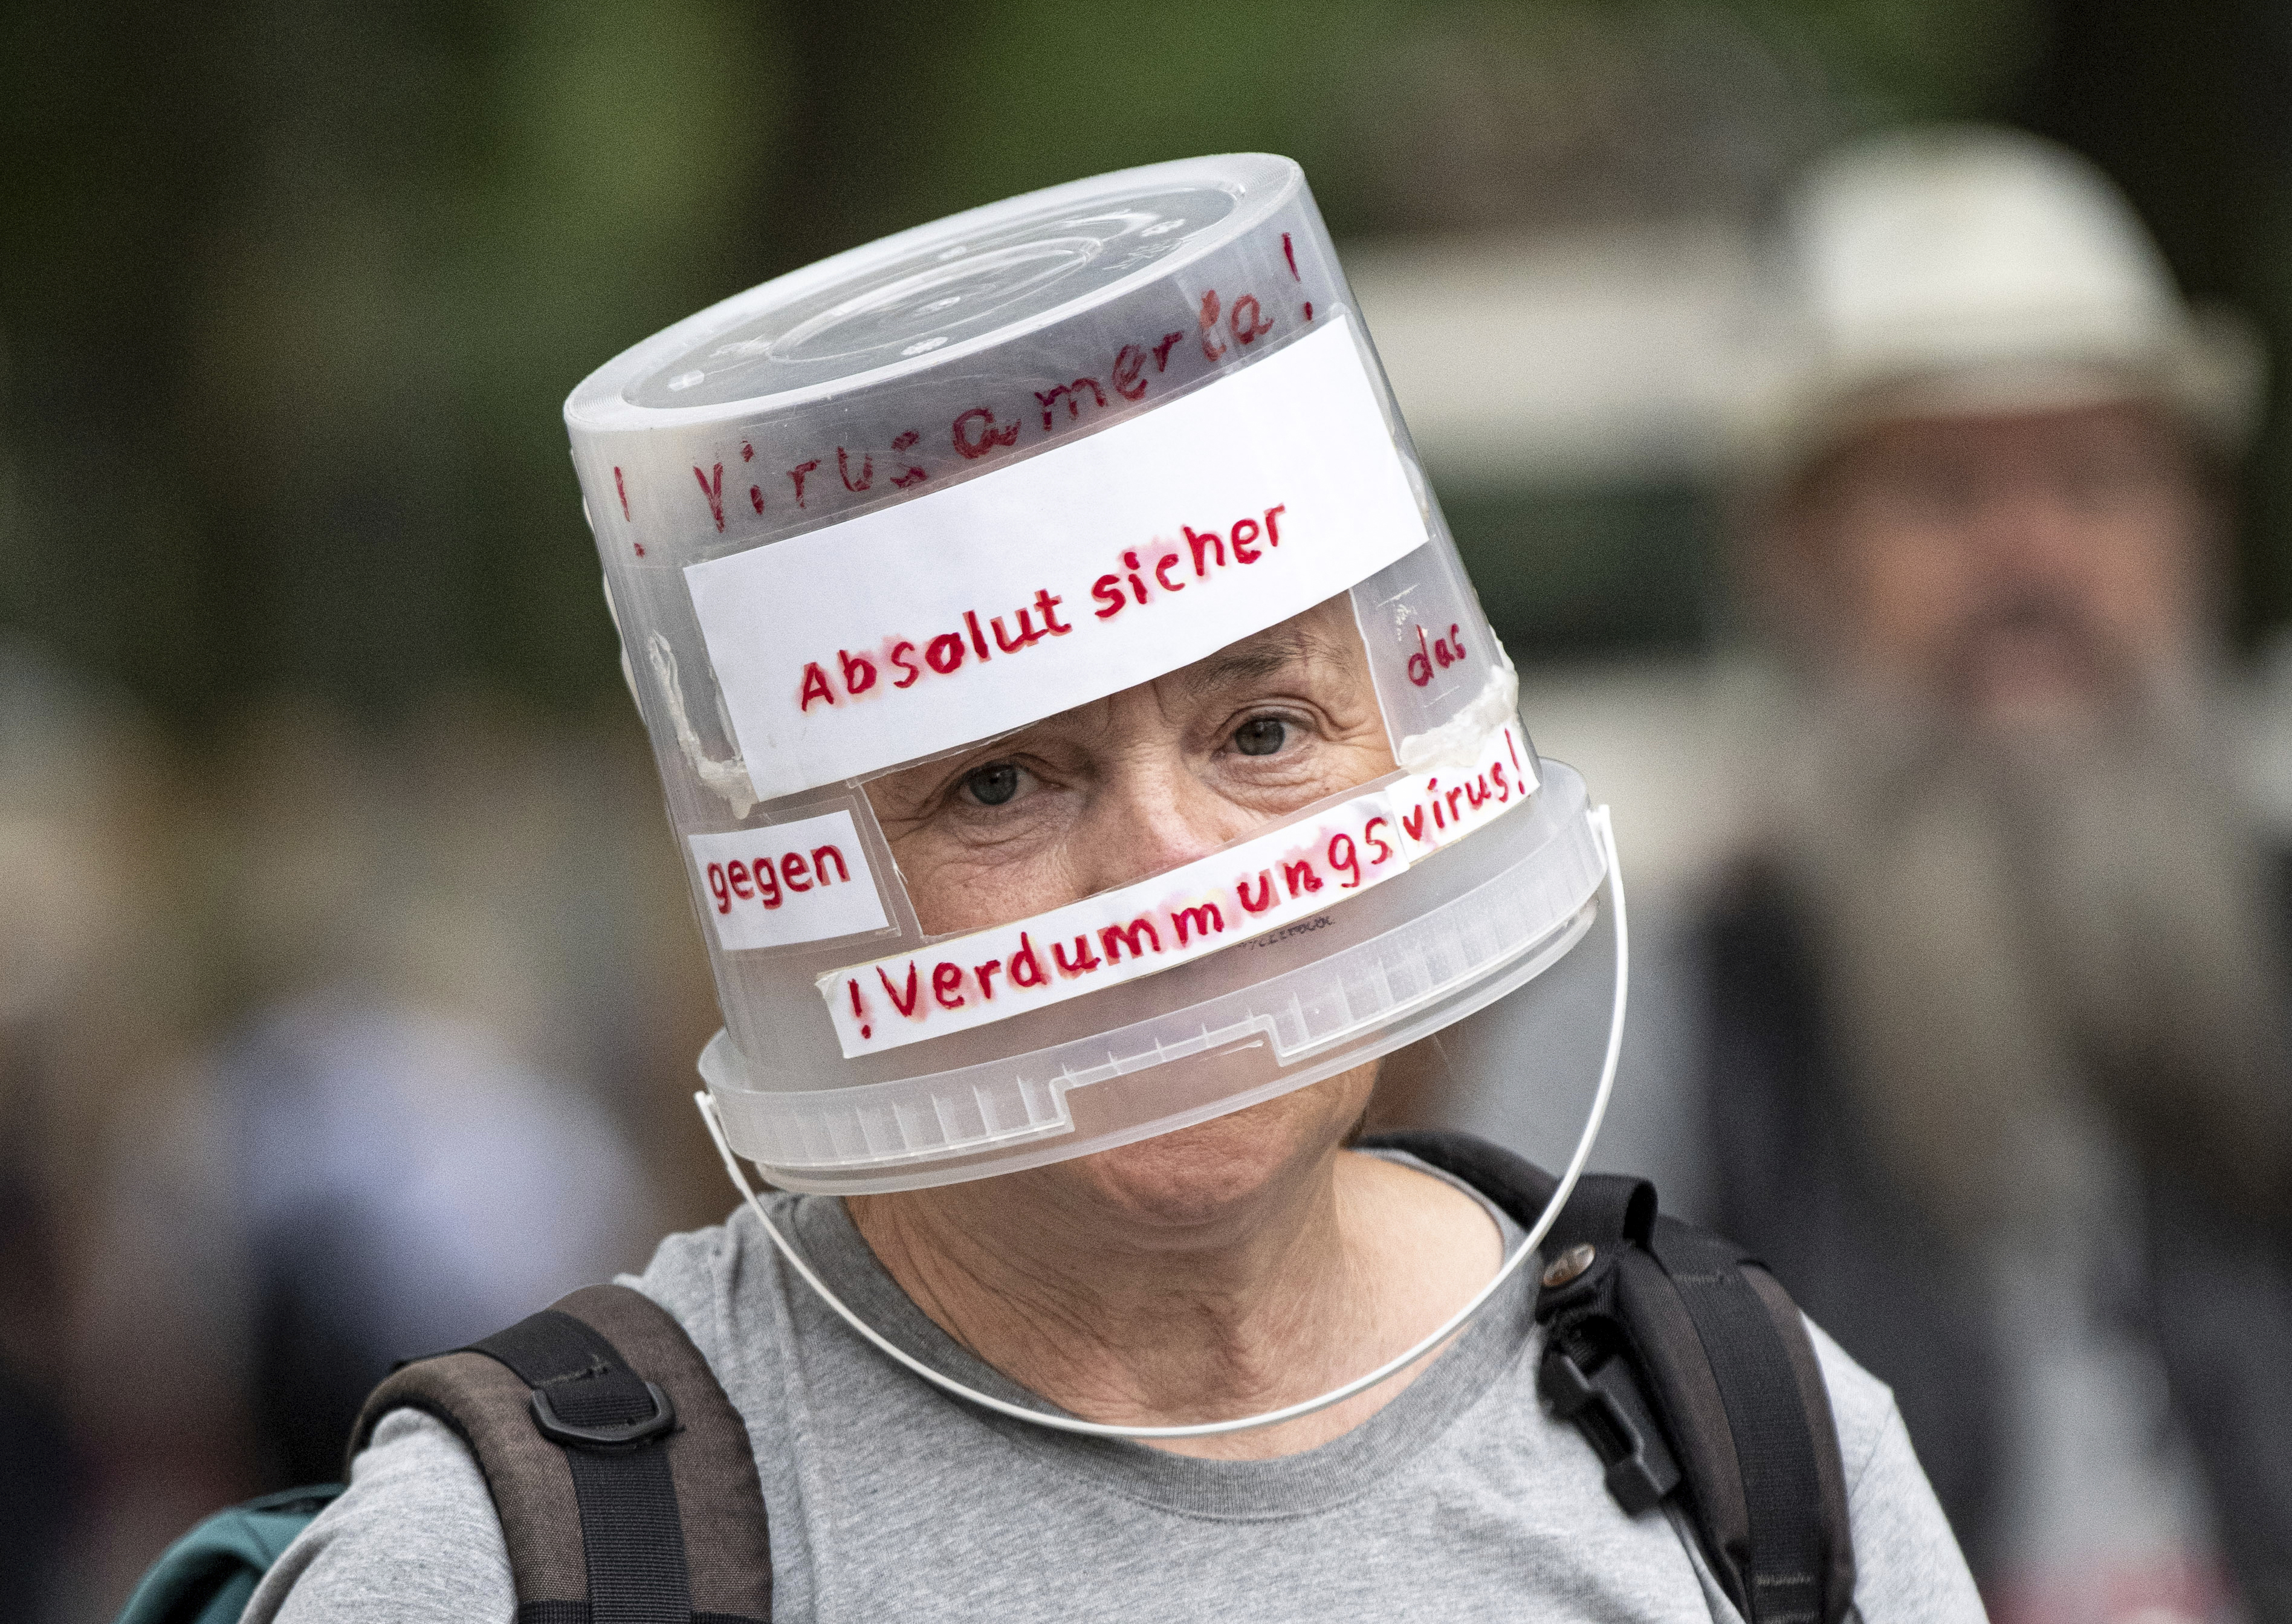 A protester in Germany